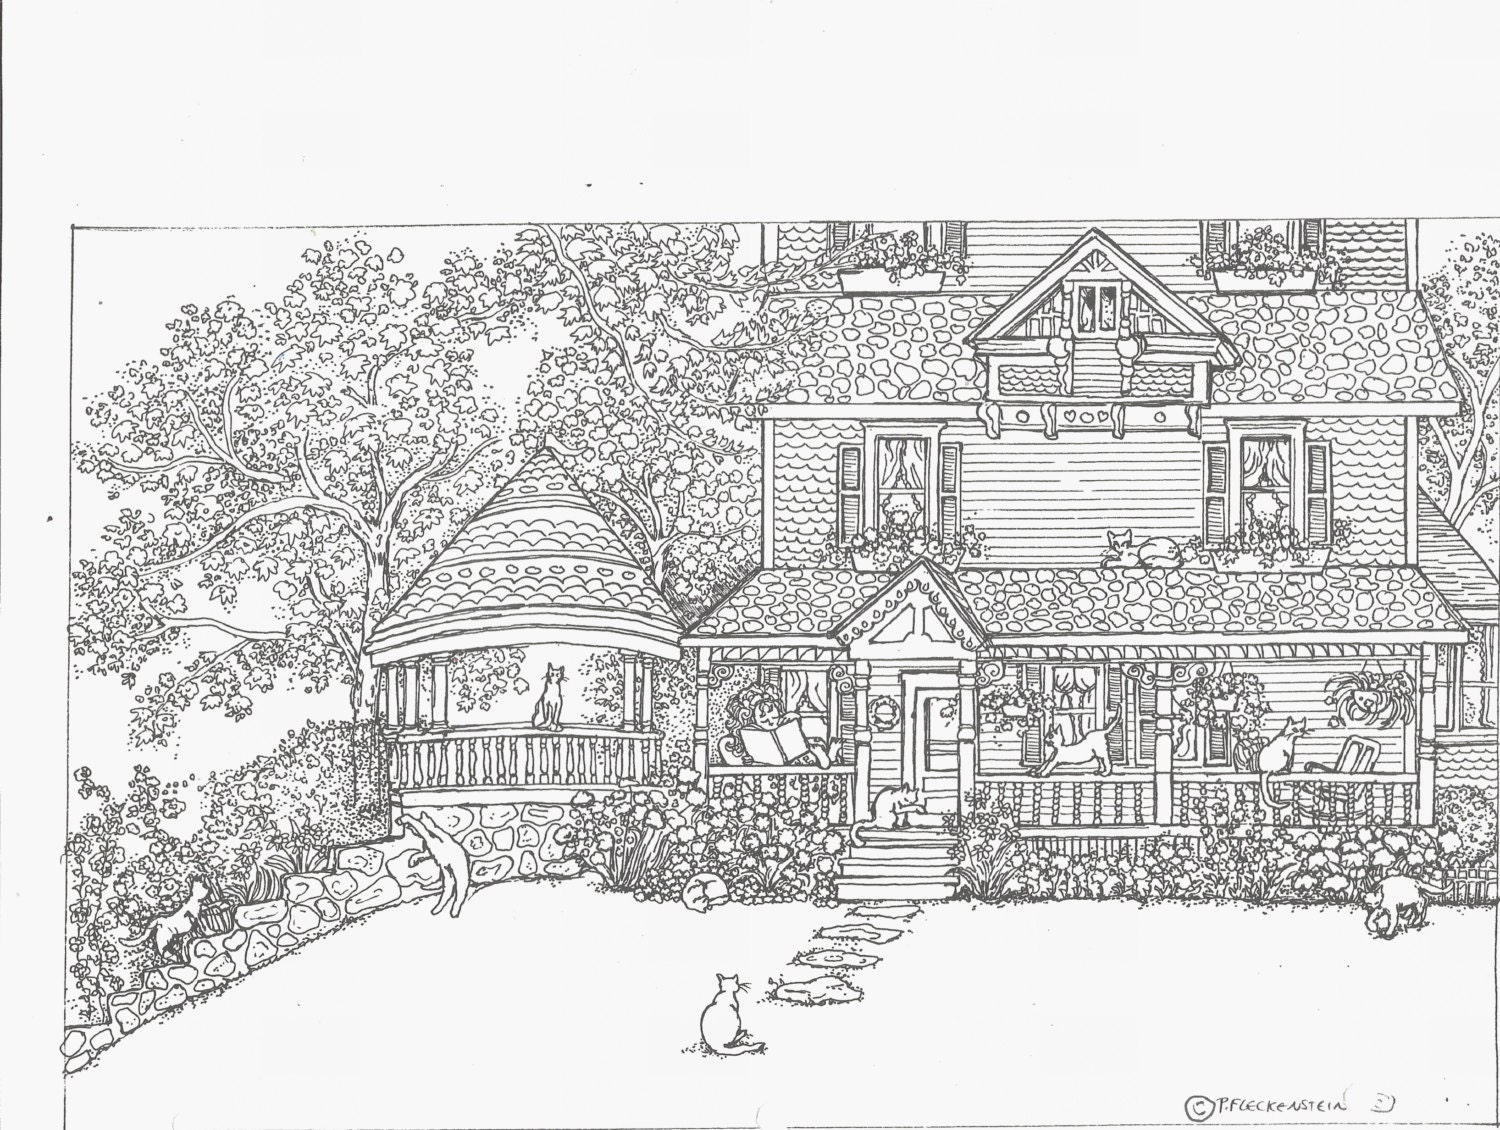 10 Best Coloring Pages for Adults Homes - Best Coloring Page Ideas and